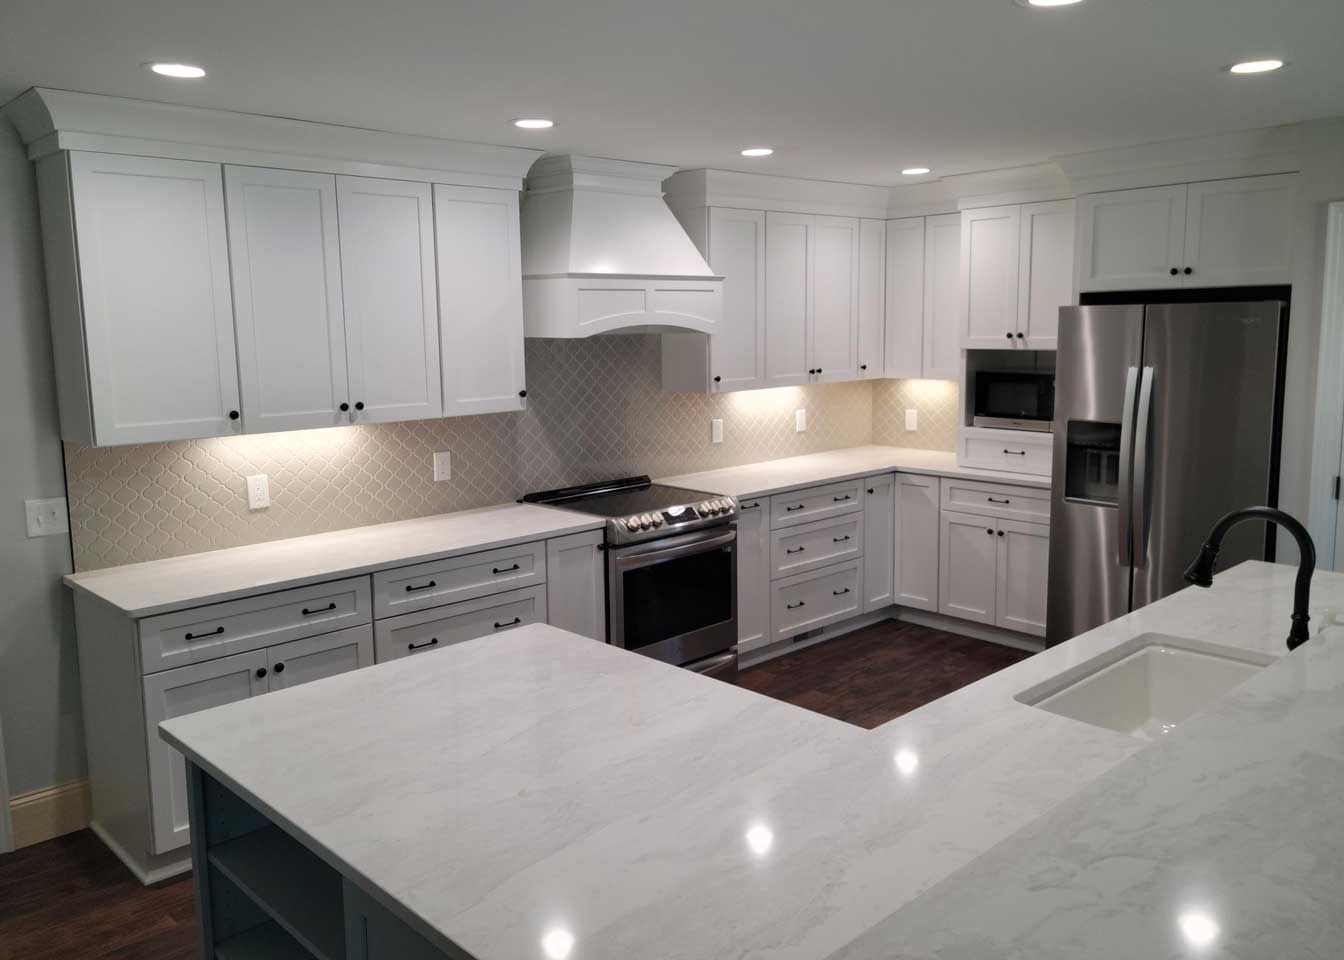 Additions and remodels in Greater Lansing area, as seen here in a newly remodeled kitchen